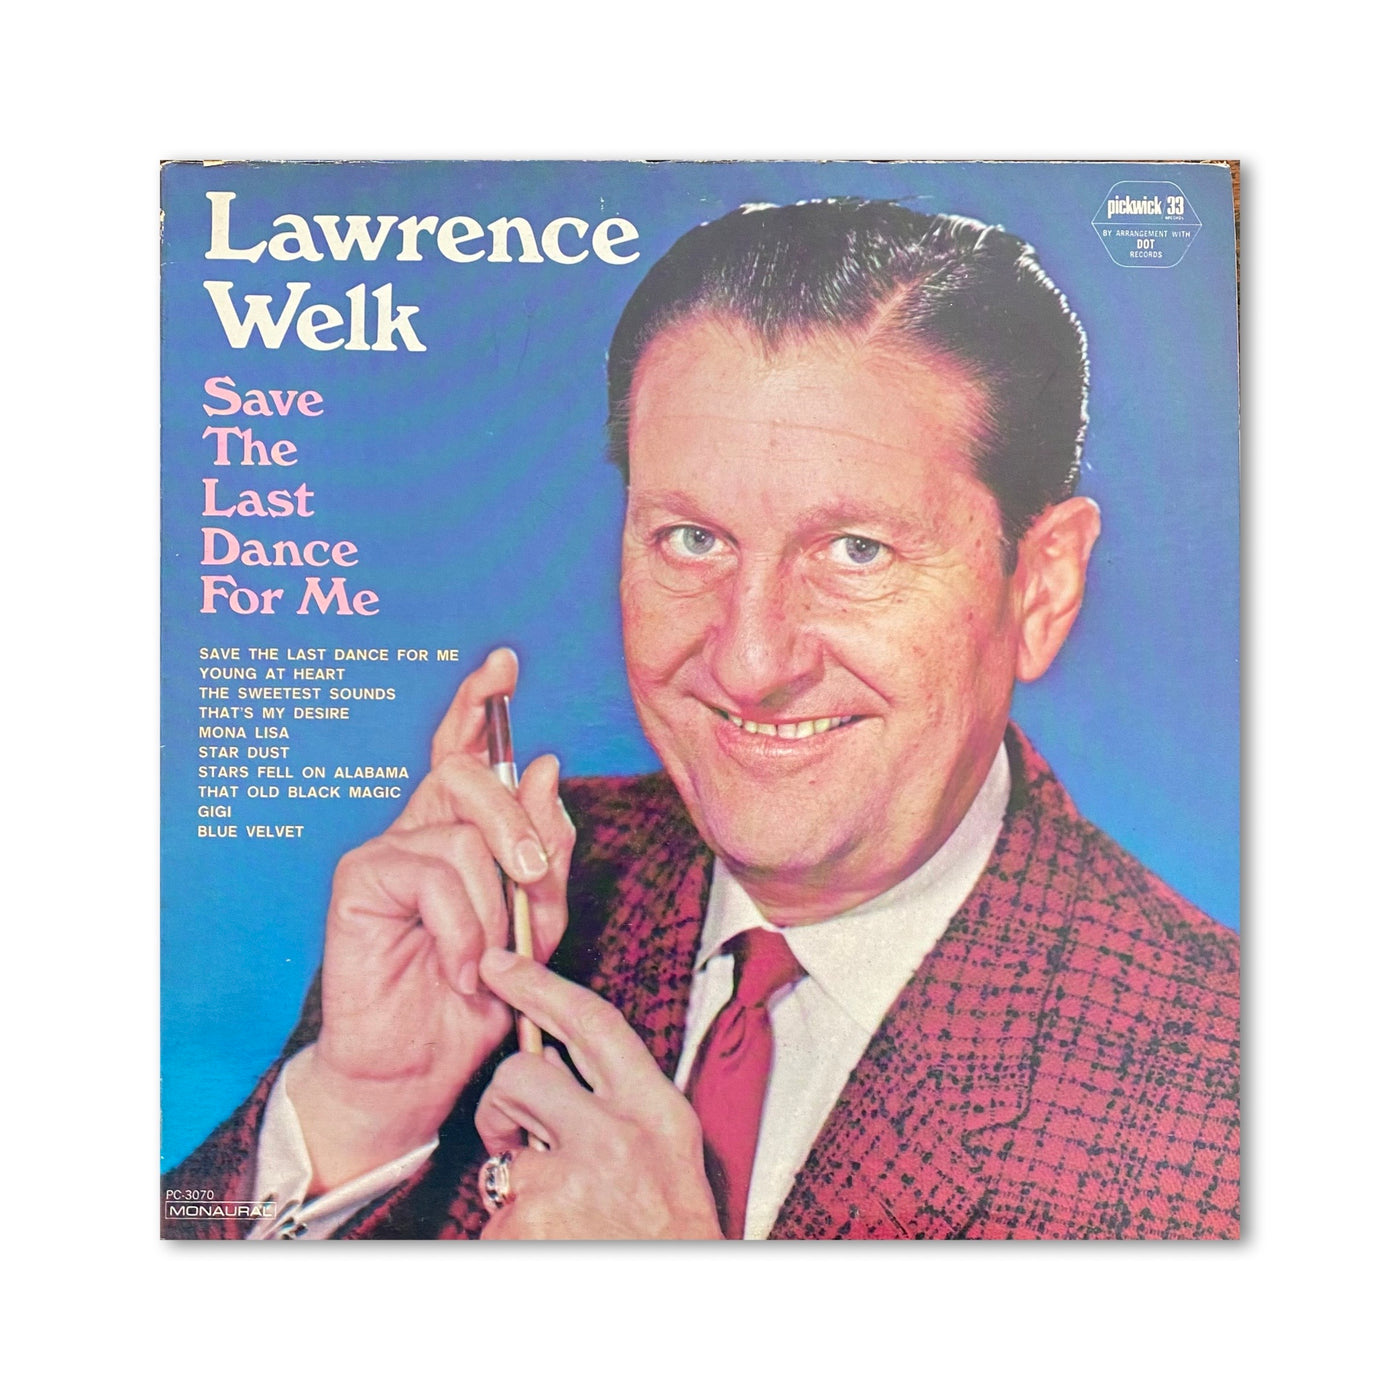 Lawrence Welk - Save The Last Dance For Me